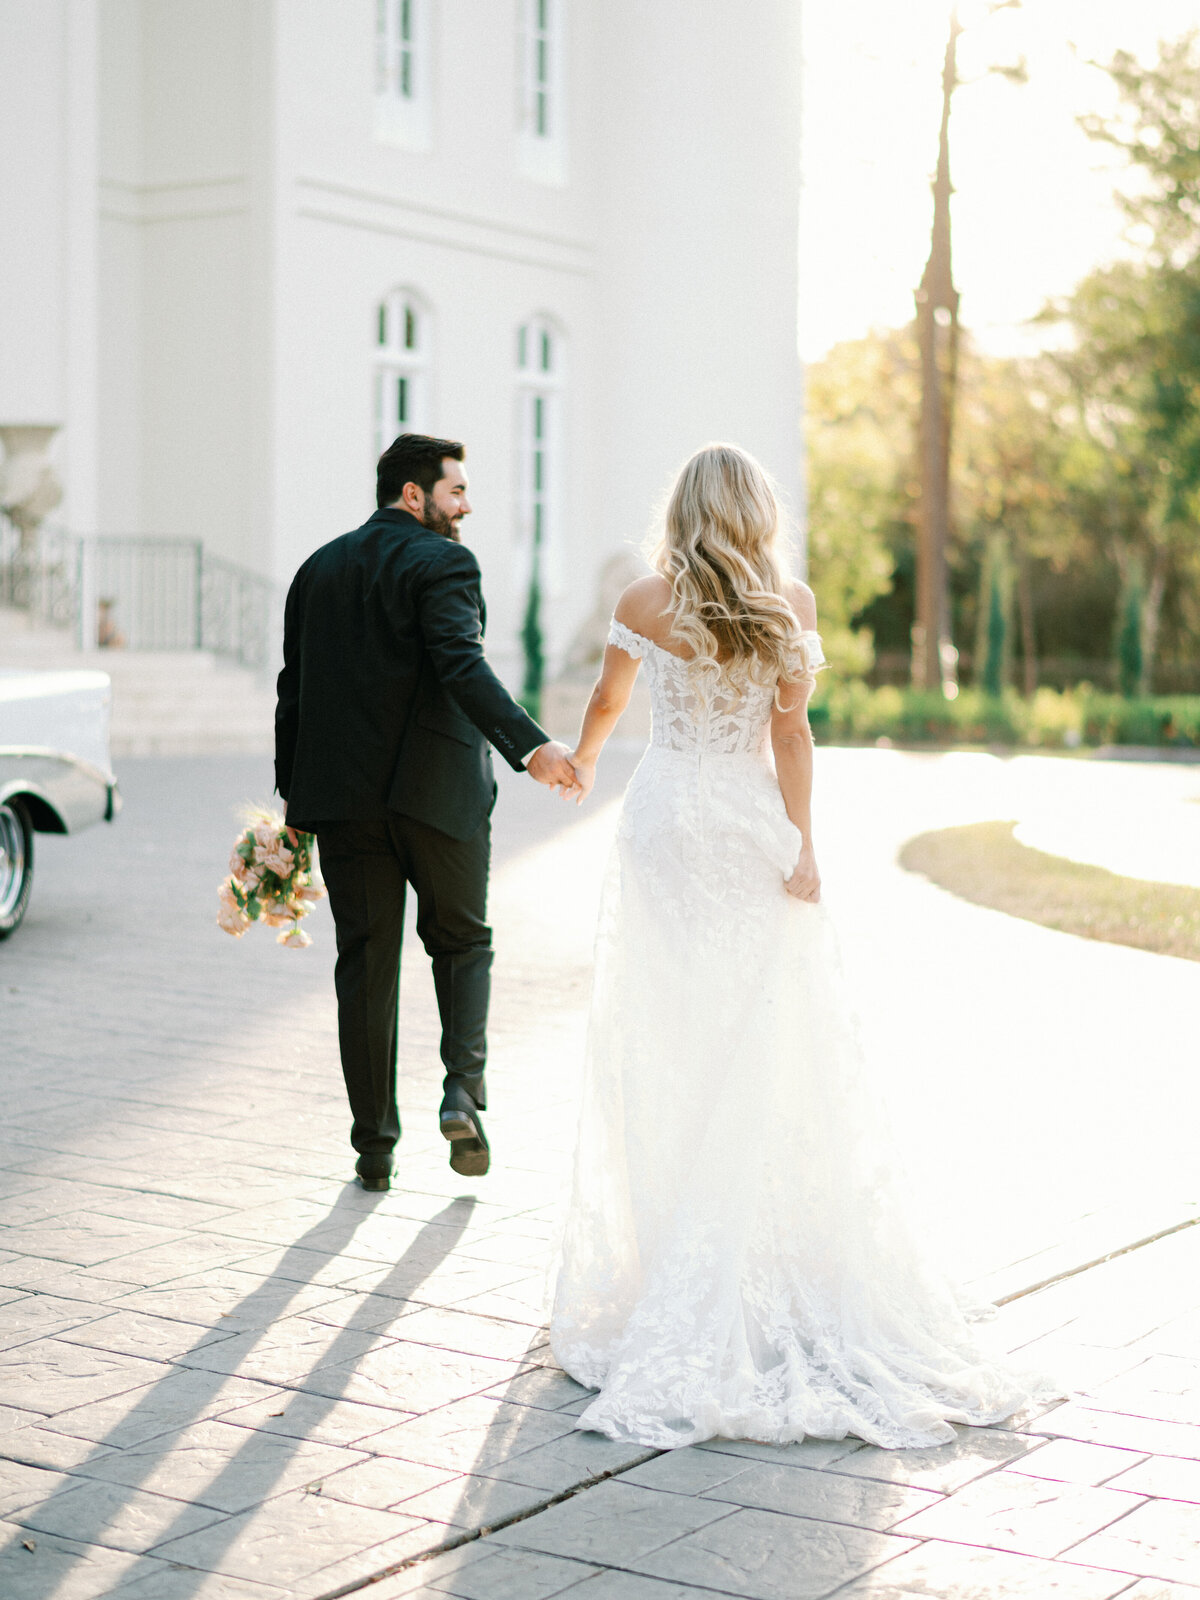 Shelby Day Photography is a wedding film photographer based in Houston & Austin, Texas. Her style is true to life, authentic, and joyful. Through her personalized approach, she effortlessly captures the real and raw emotions of your special day.